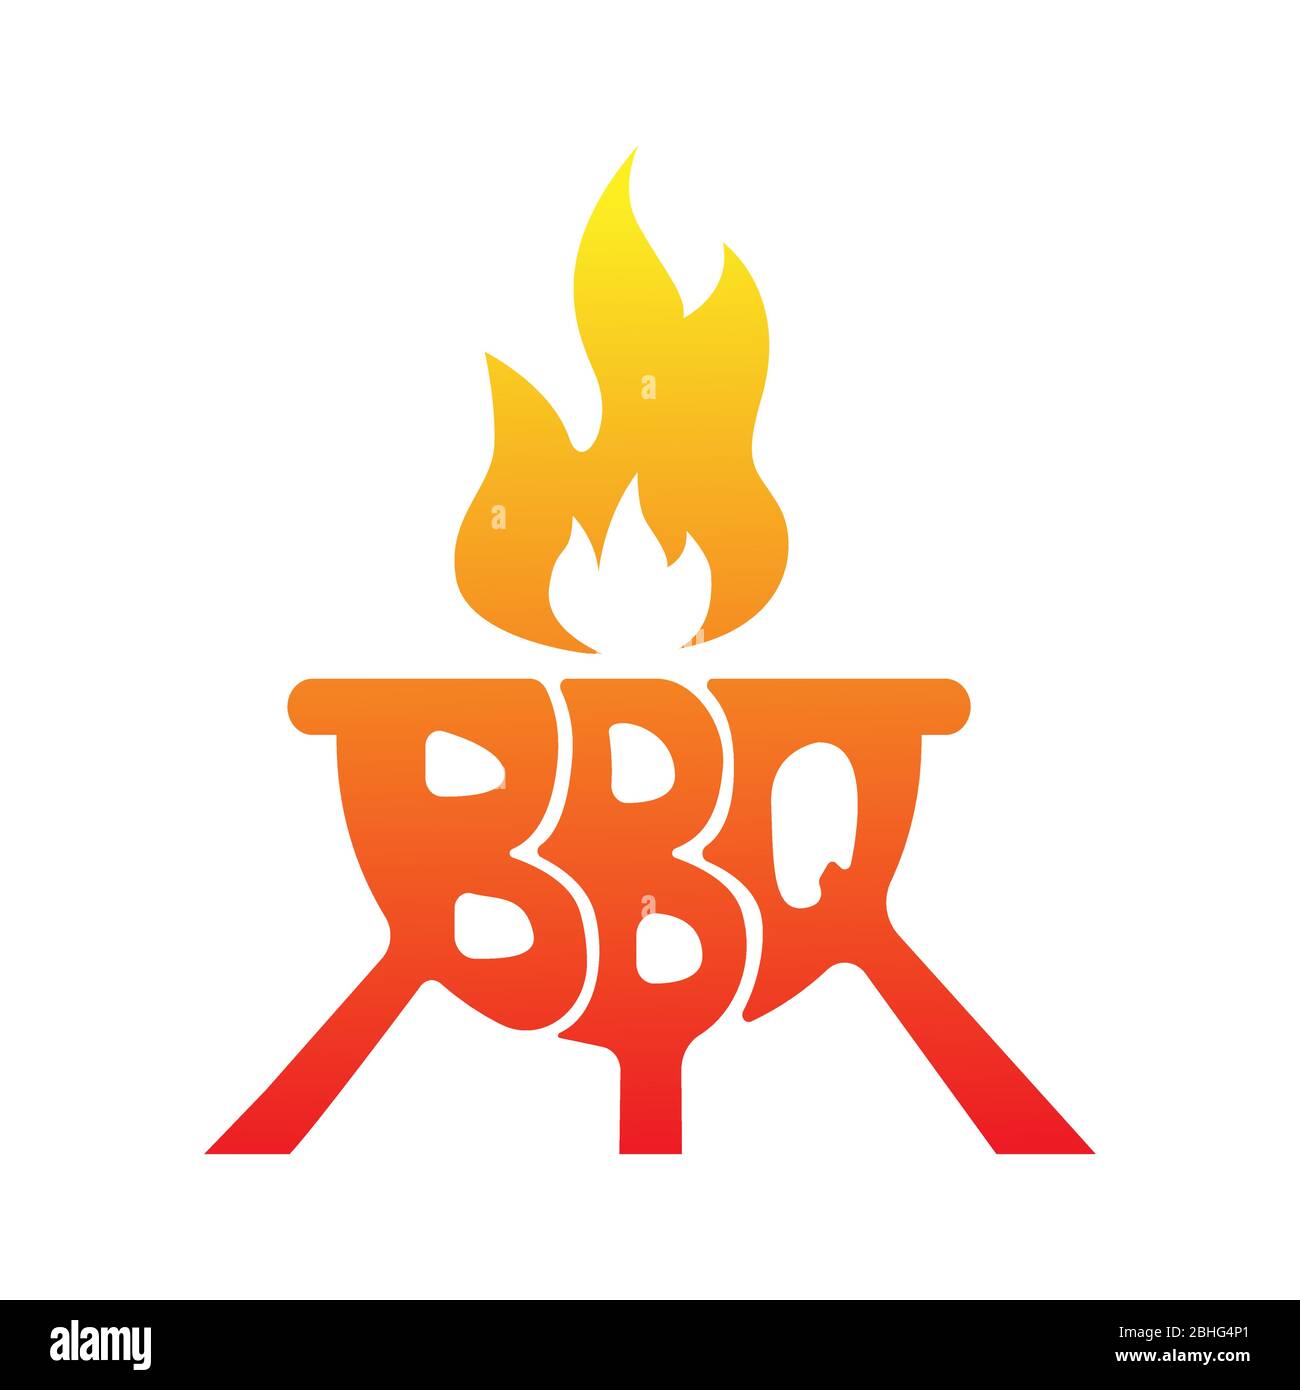 BBQ grill logo design vector, banners graphic,illustration on white background Stock Vector